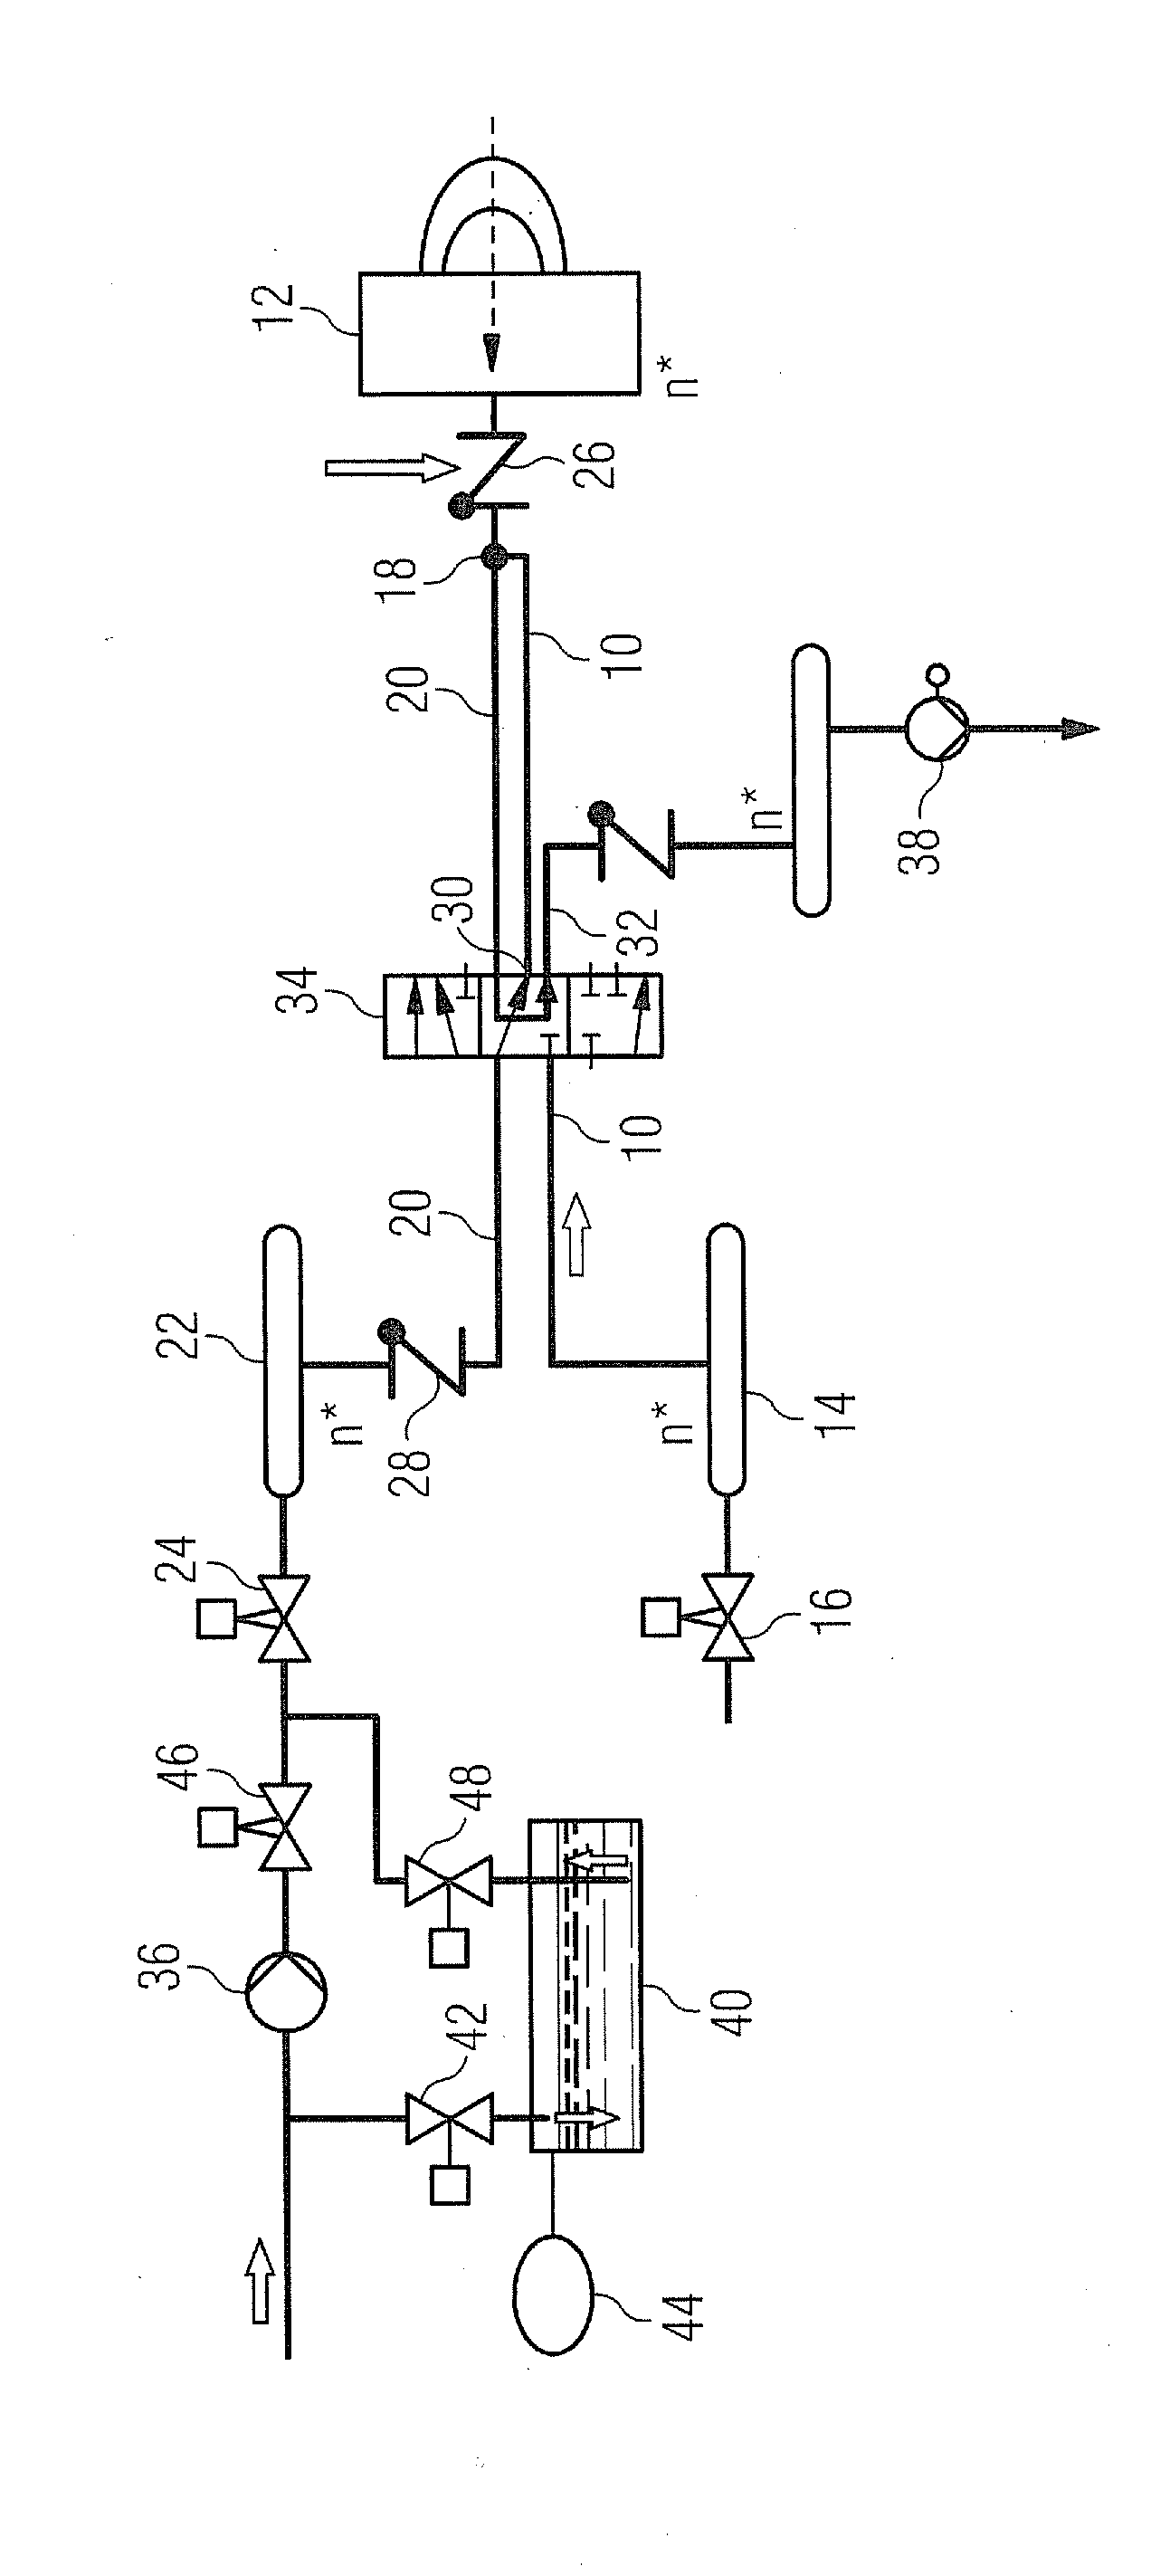 Method for Flushing a Section of a Fuel System of a Gas Turbine